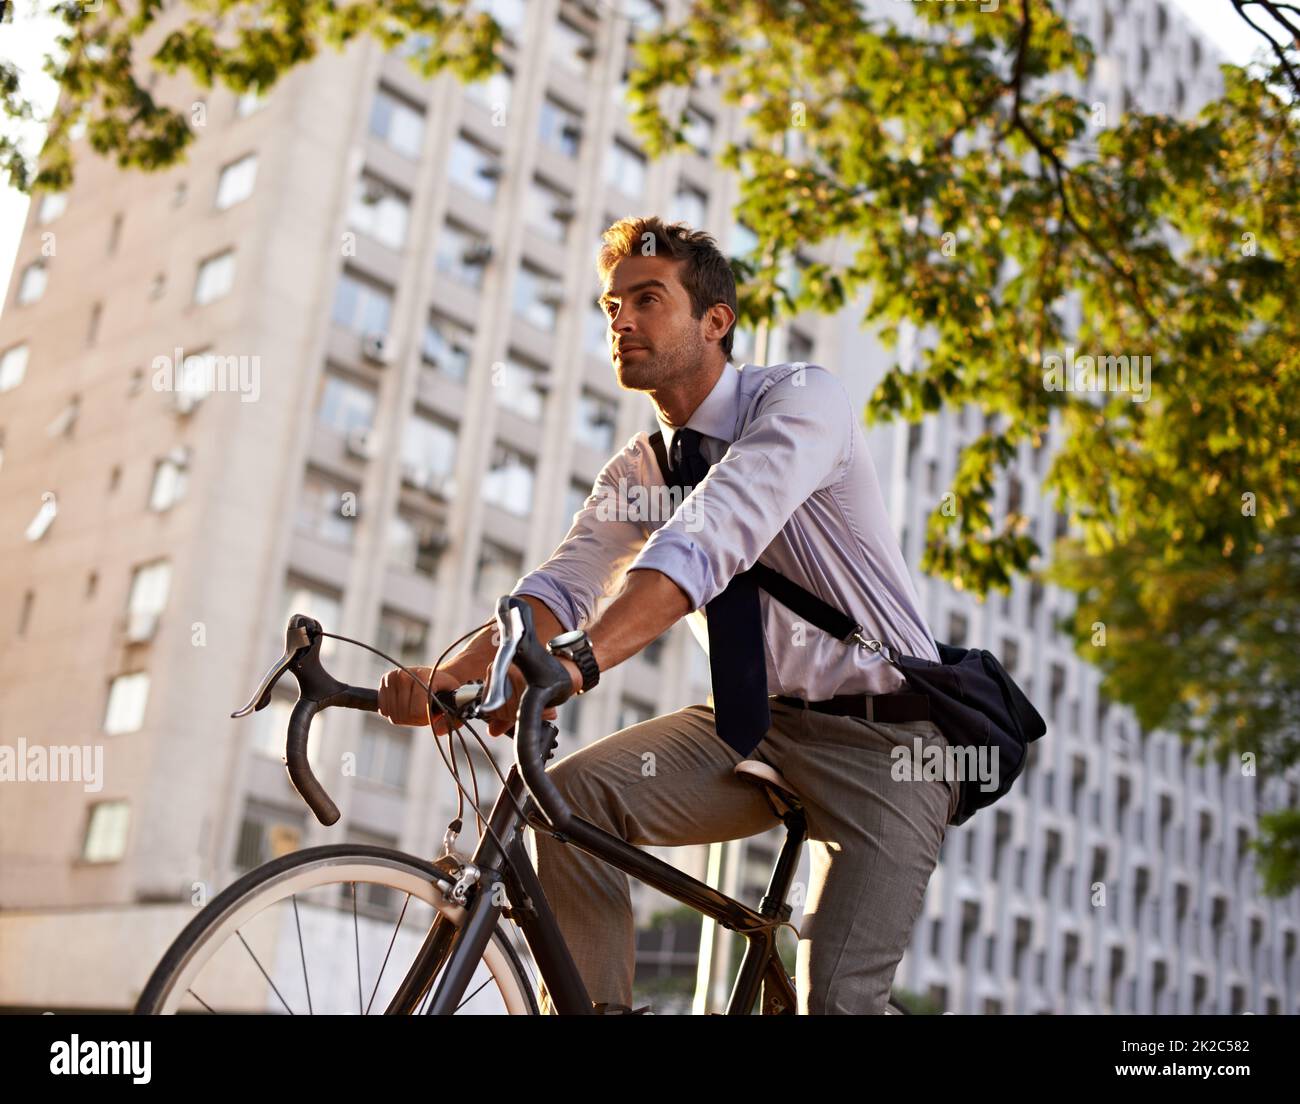 Off to work on his wheels. Shot of a businessman commuting to work with his bicycle. Stock Photo